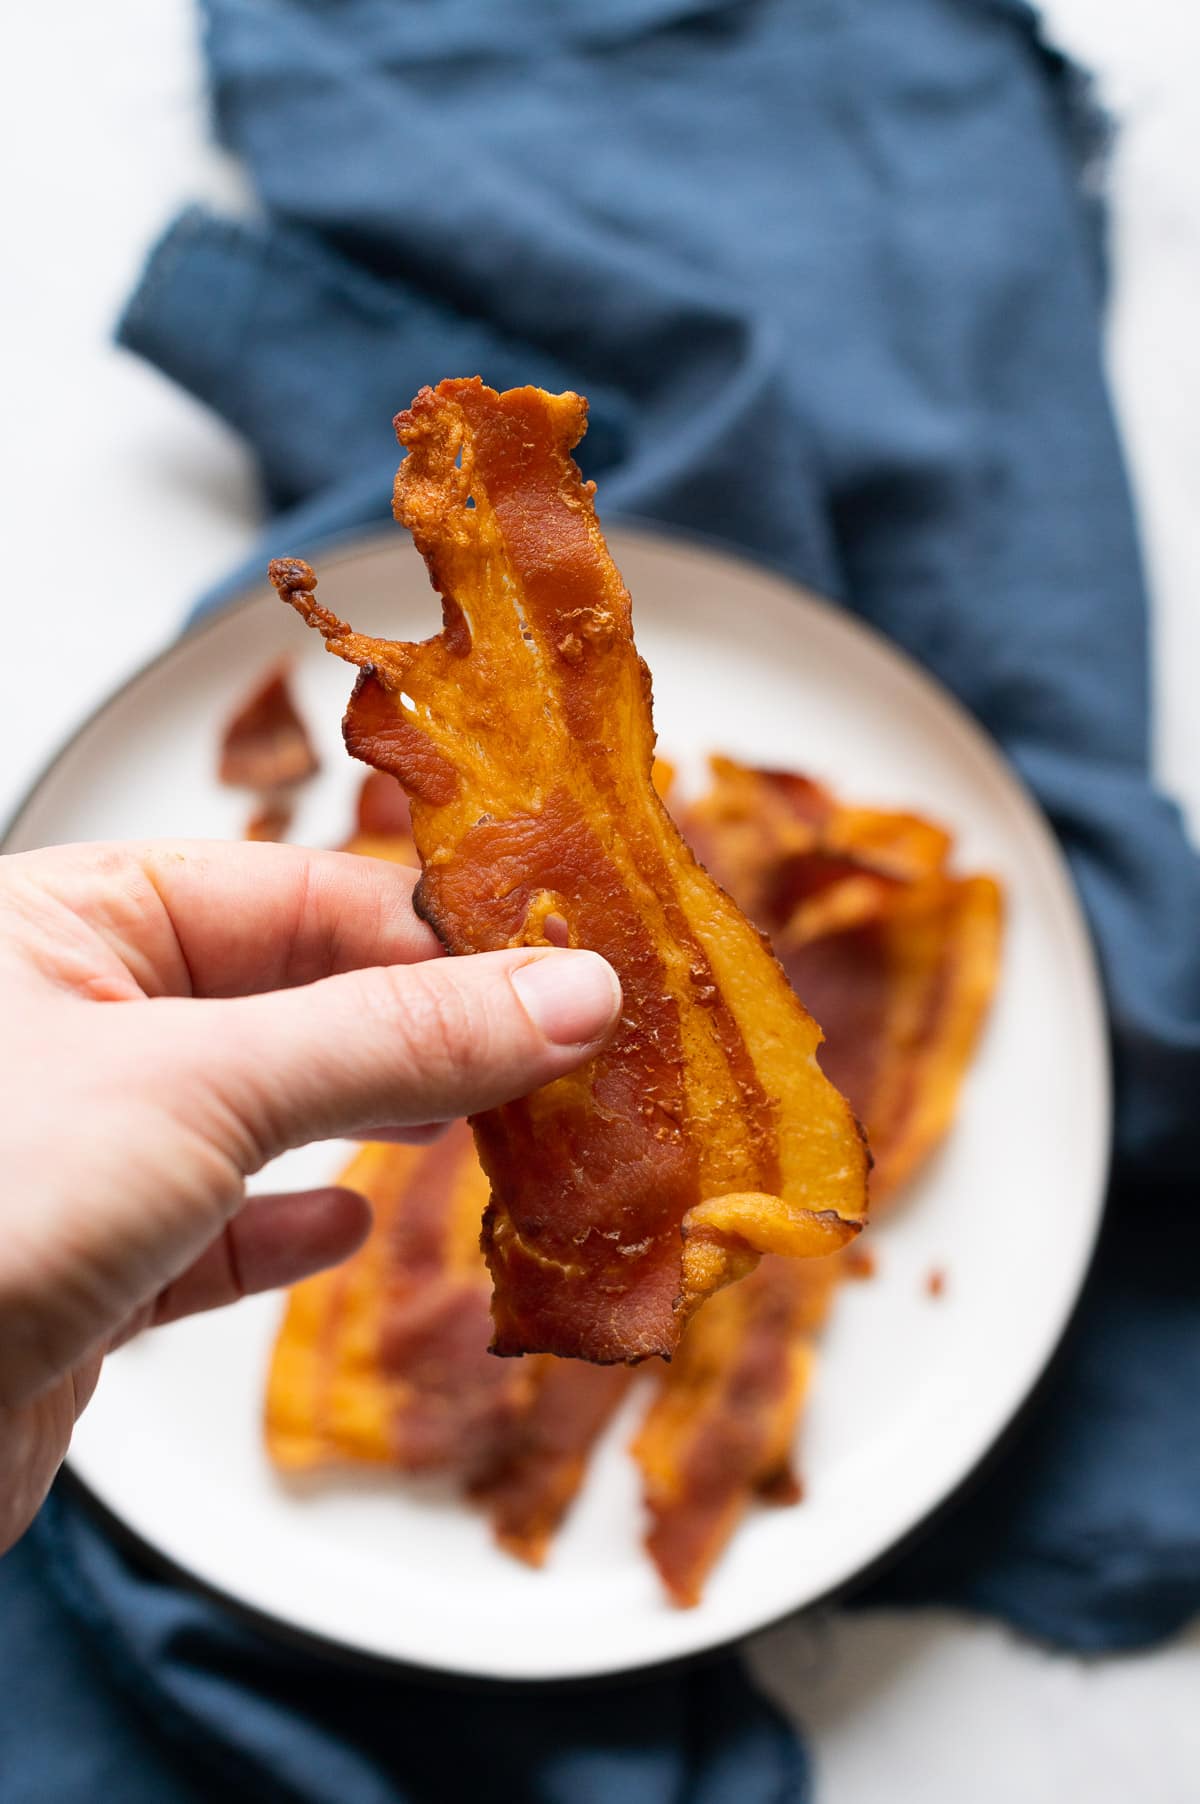 Person holding crispy baked bacon slice.